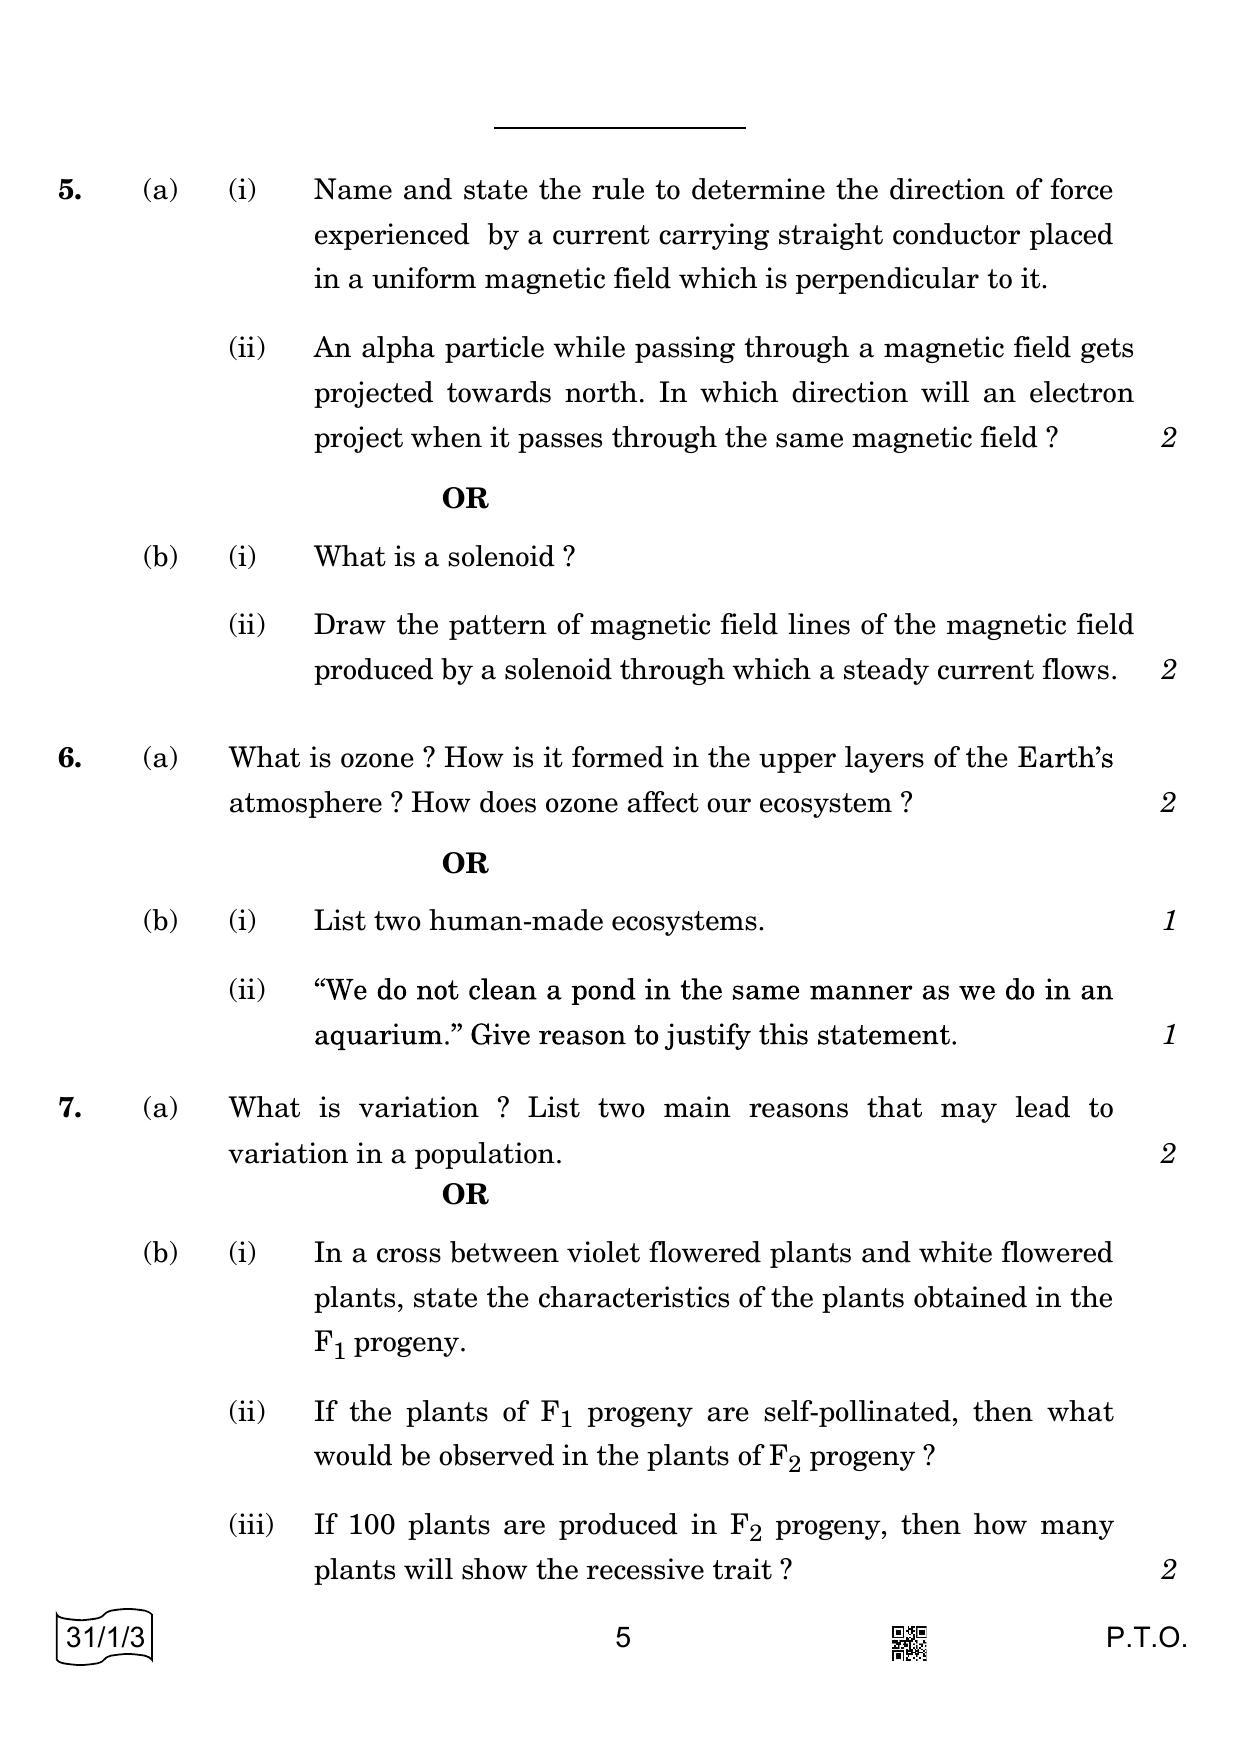 CBSE Class 10 31-1-3 Science 2022 Question Paper - Page 5